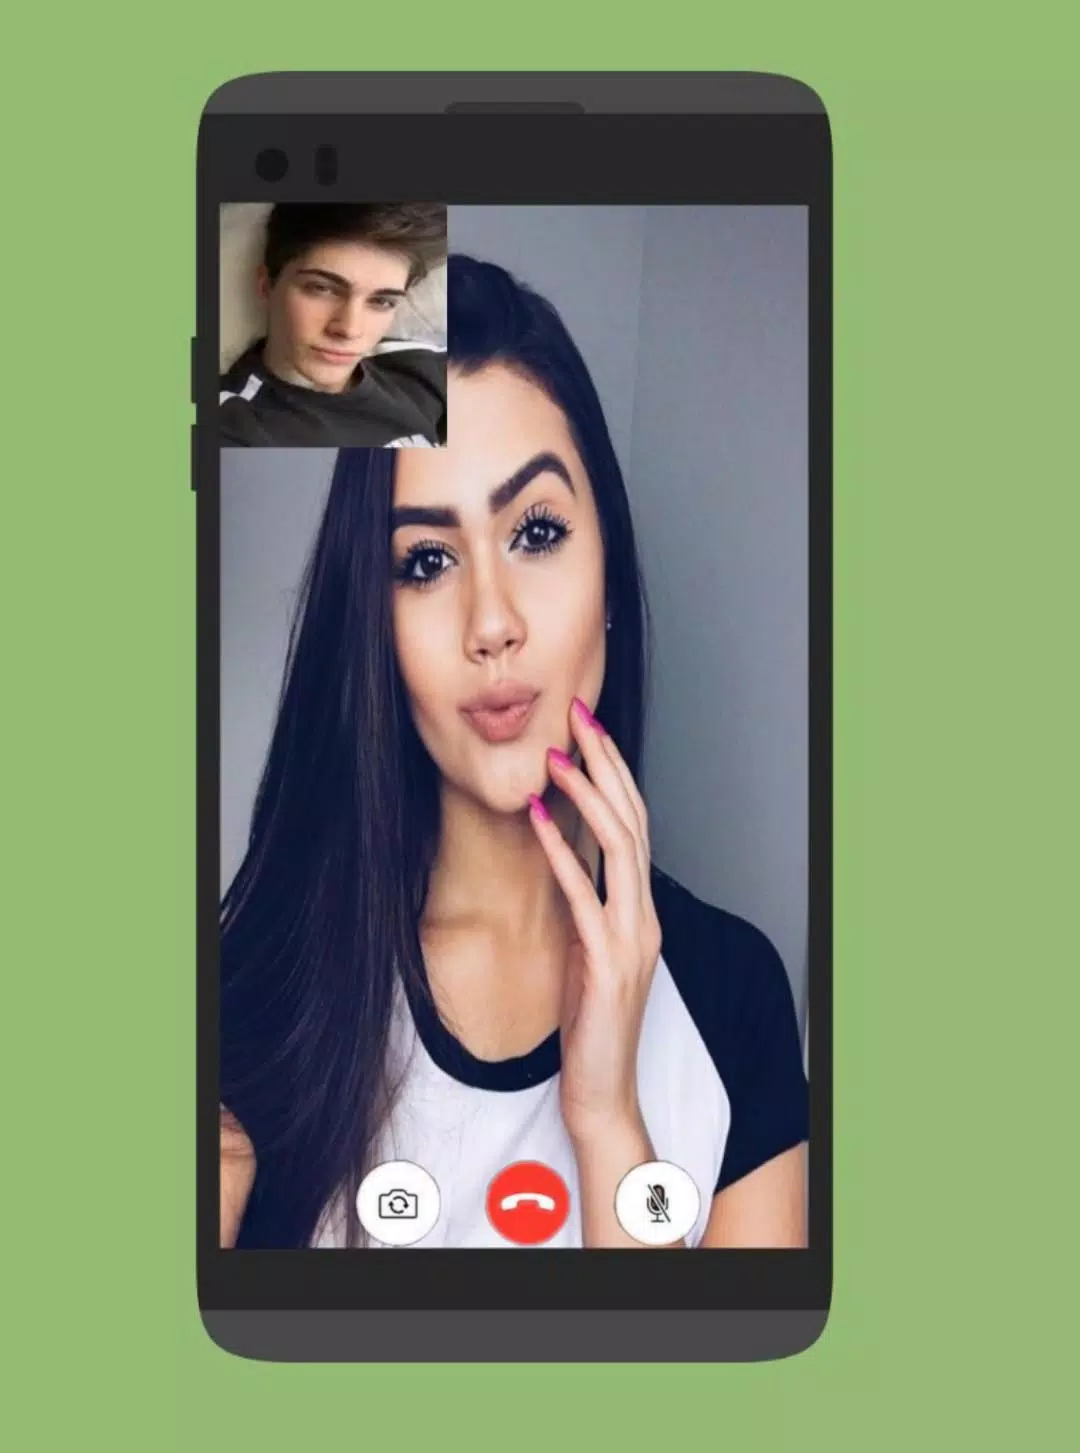 Online video chat onCamChat